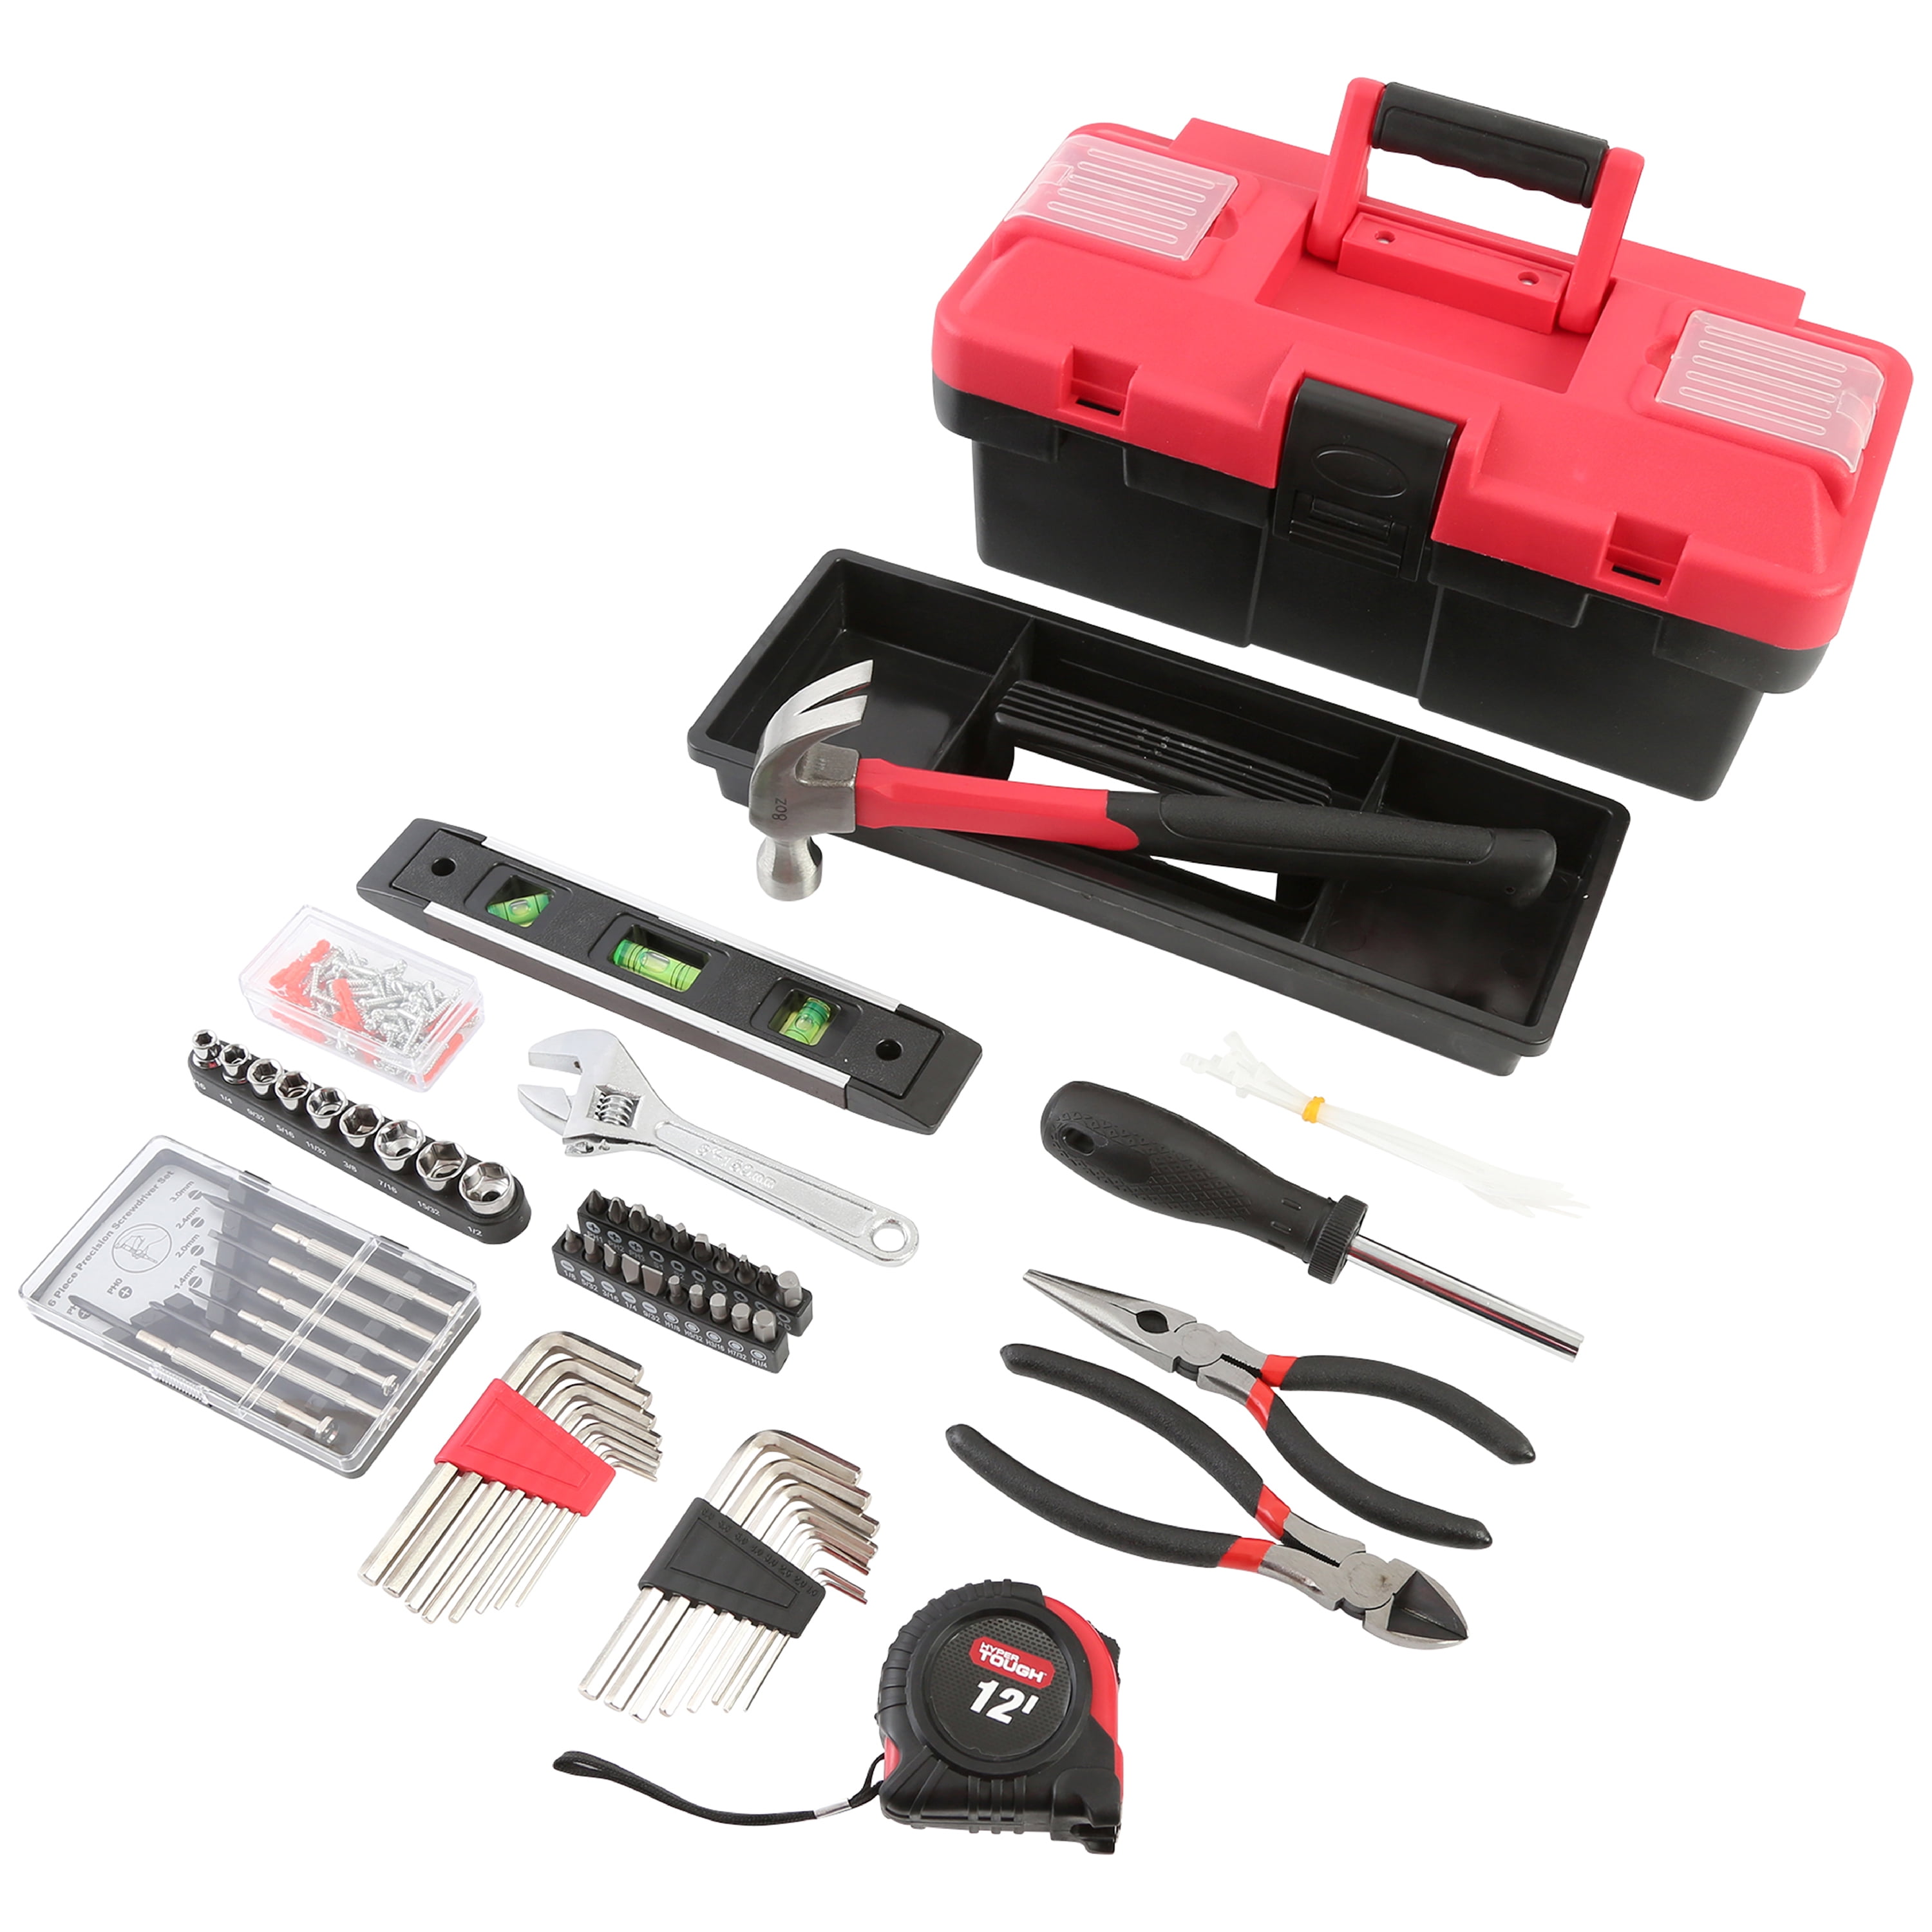 Essential Heat-Treated Steel Hand Tool and Basic Repair Set for Apartments Stalwart Tool Kit Homeowners 132 Pieces with Carrying Case Dorm